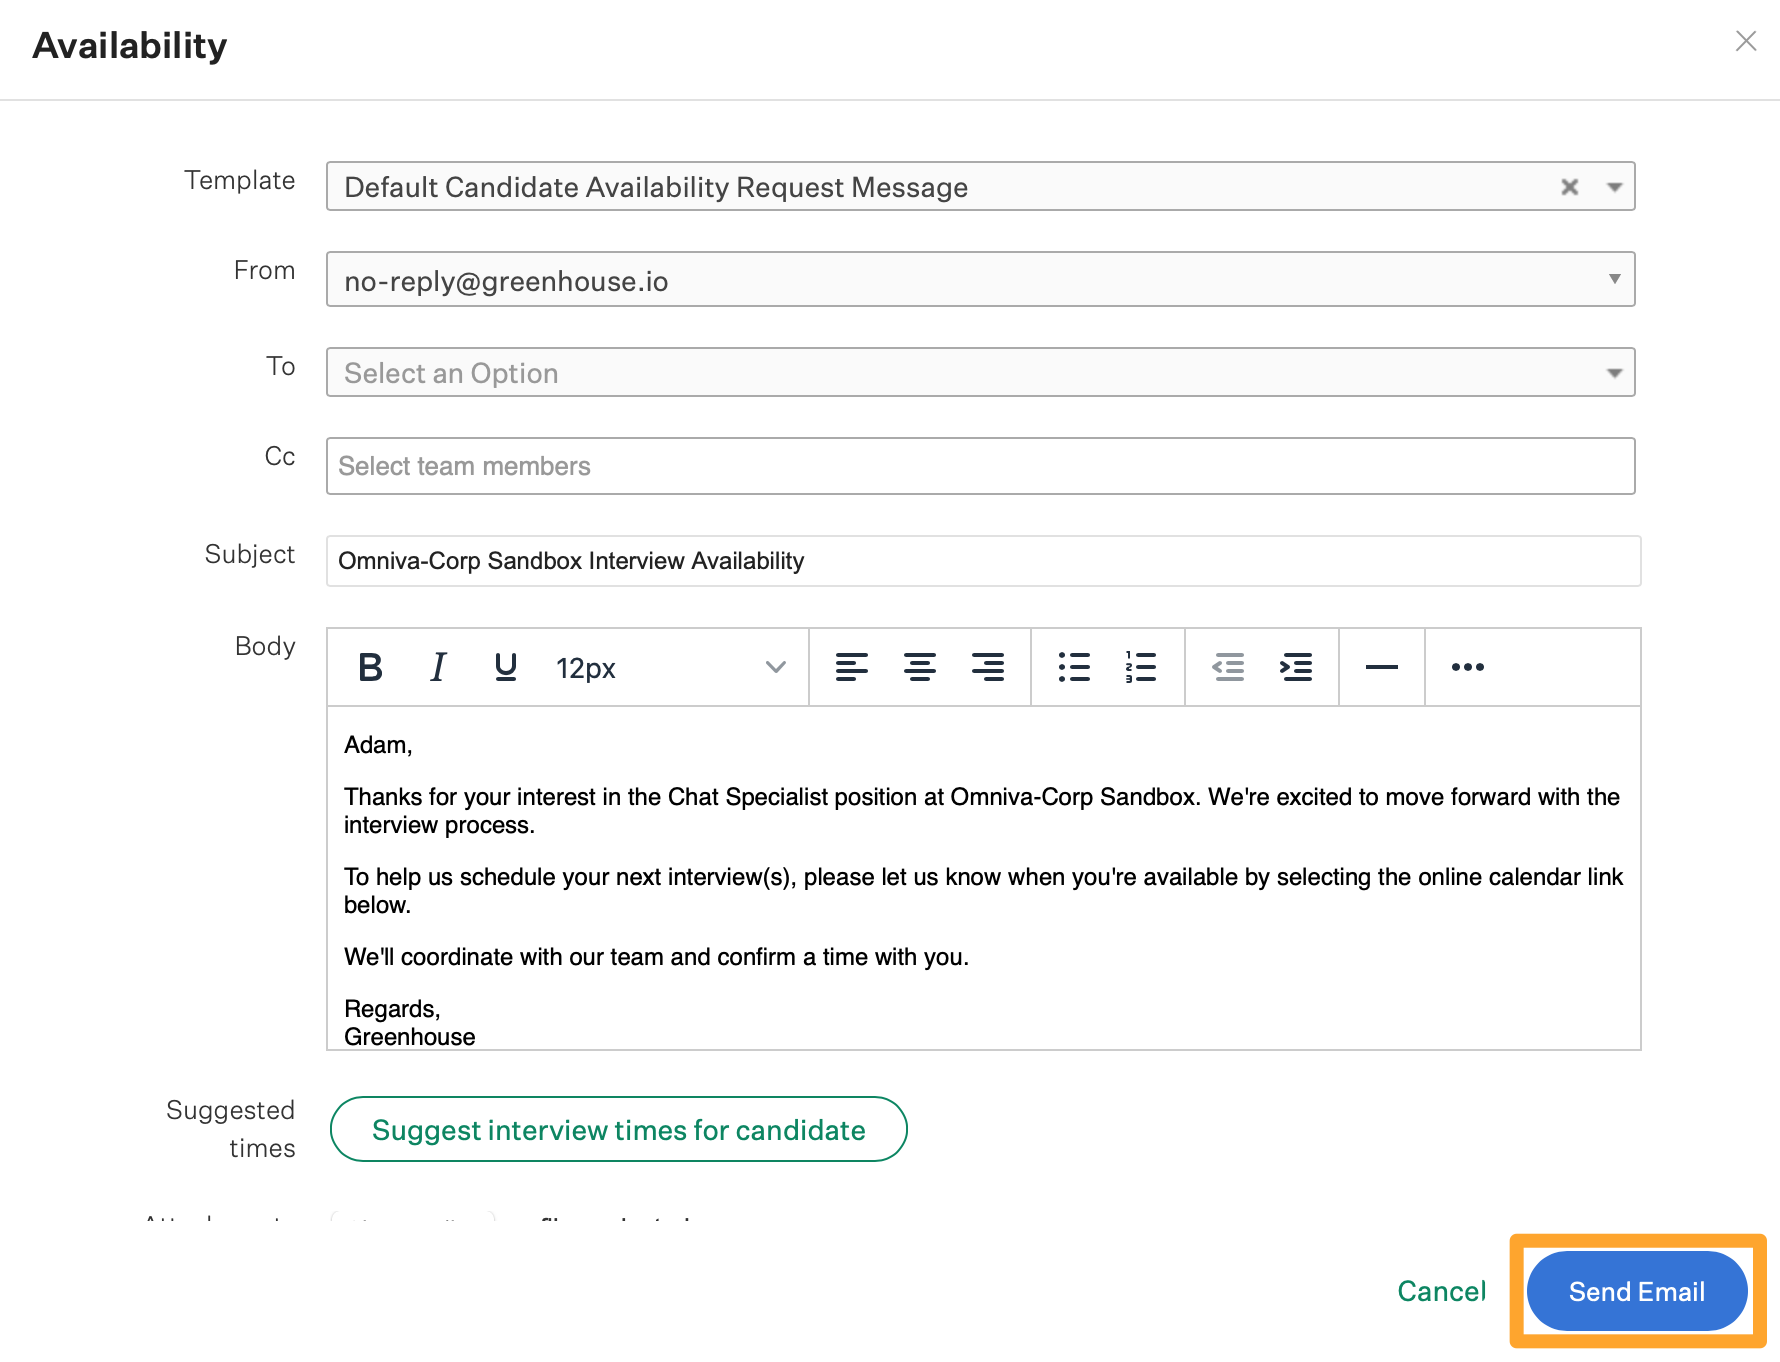 Screenshot-of-send-email-button-on-candidate-availability-request.png